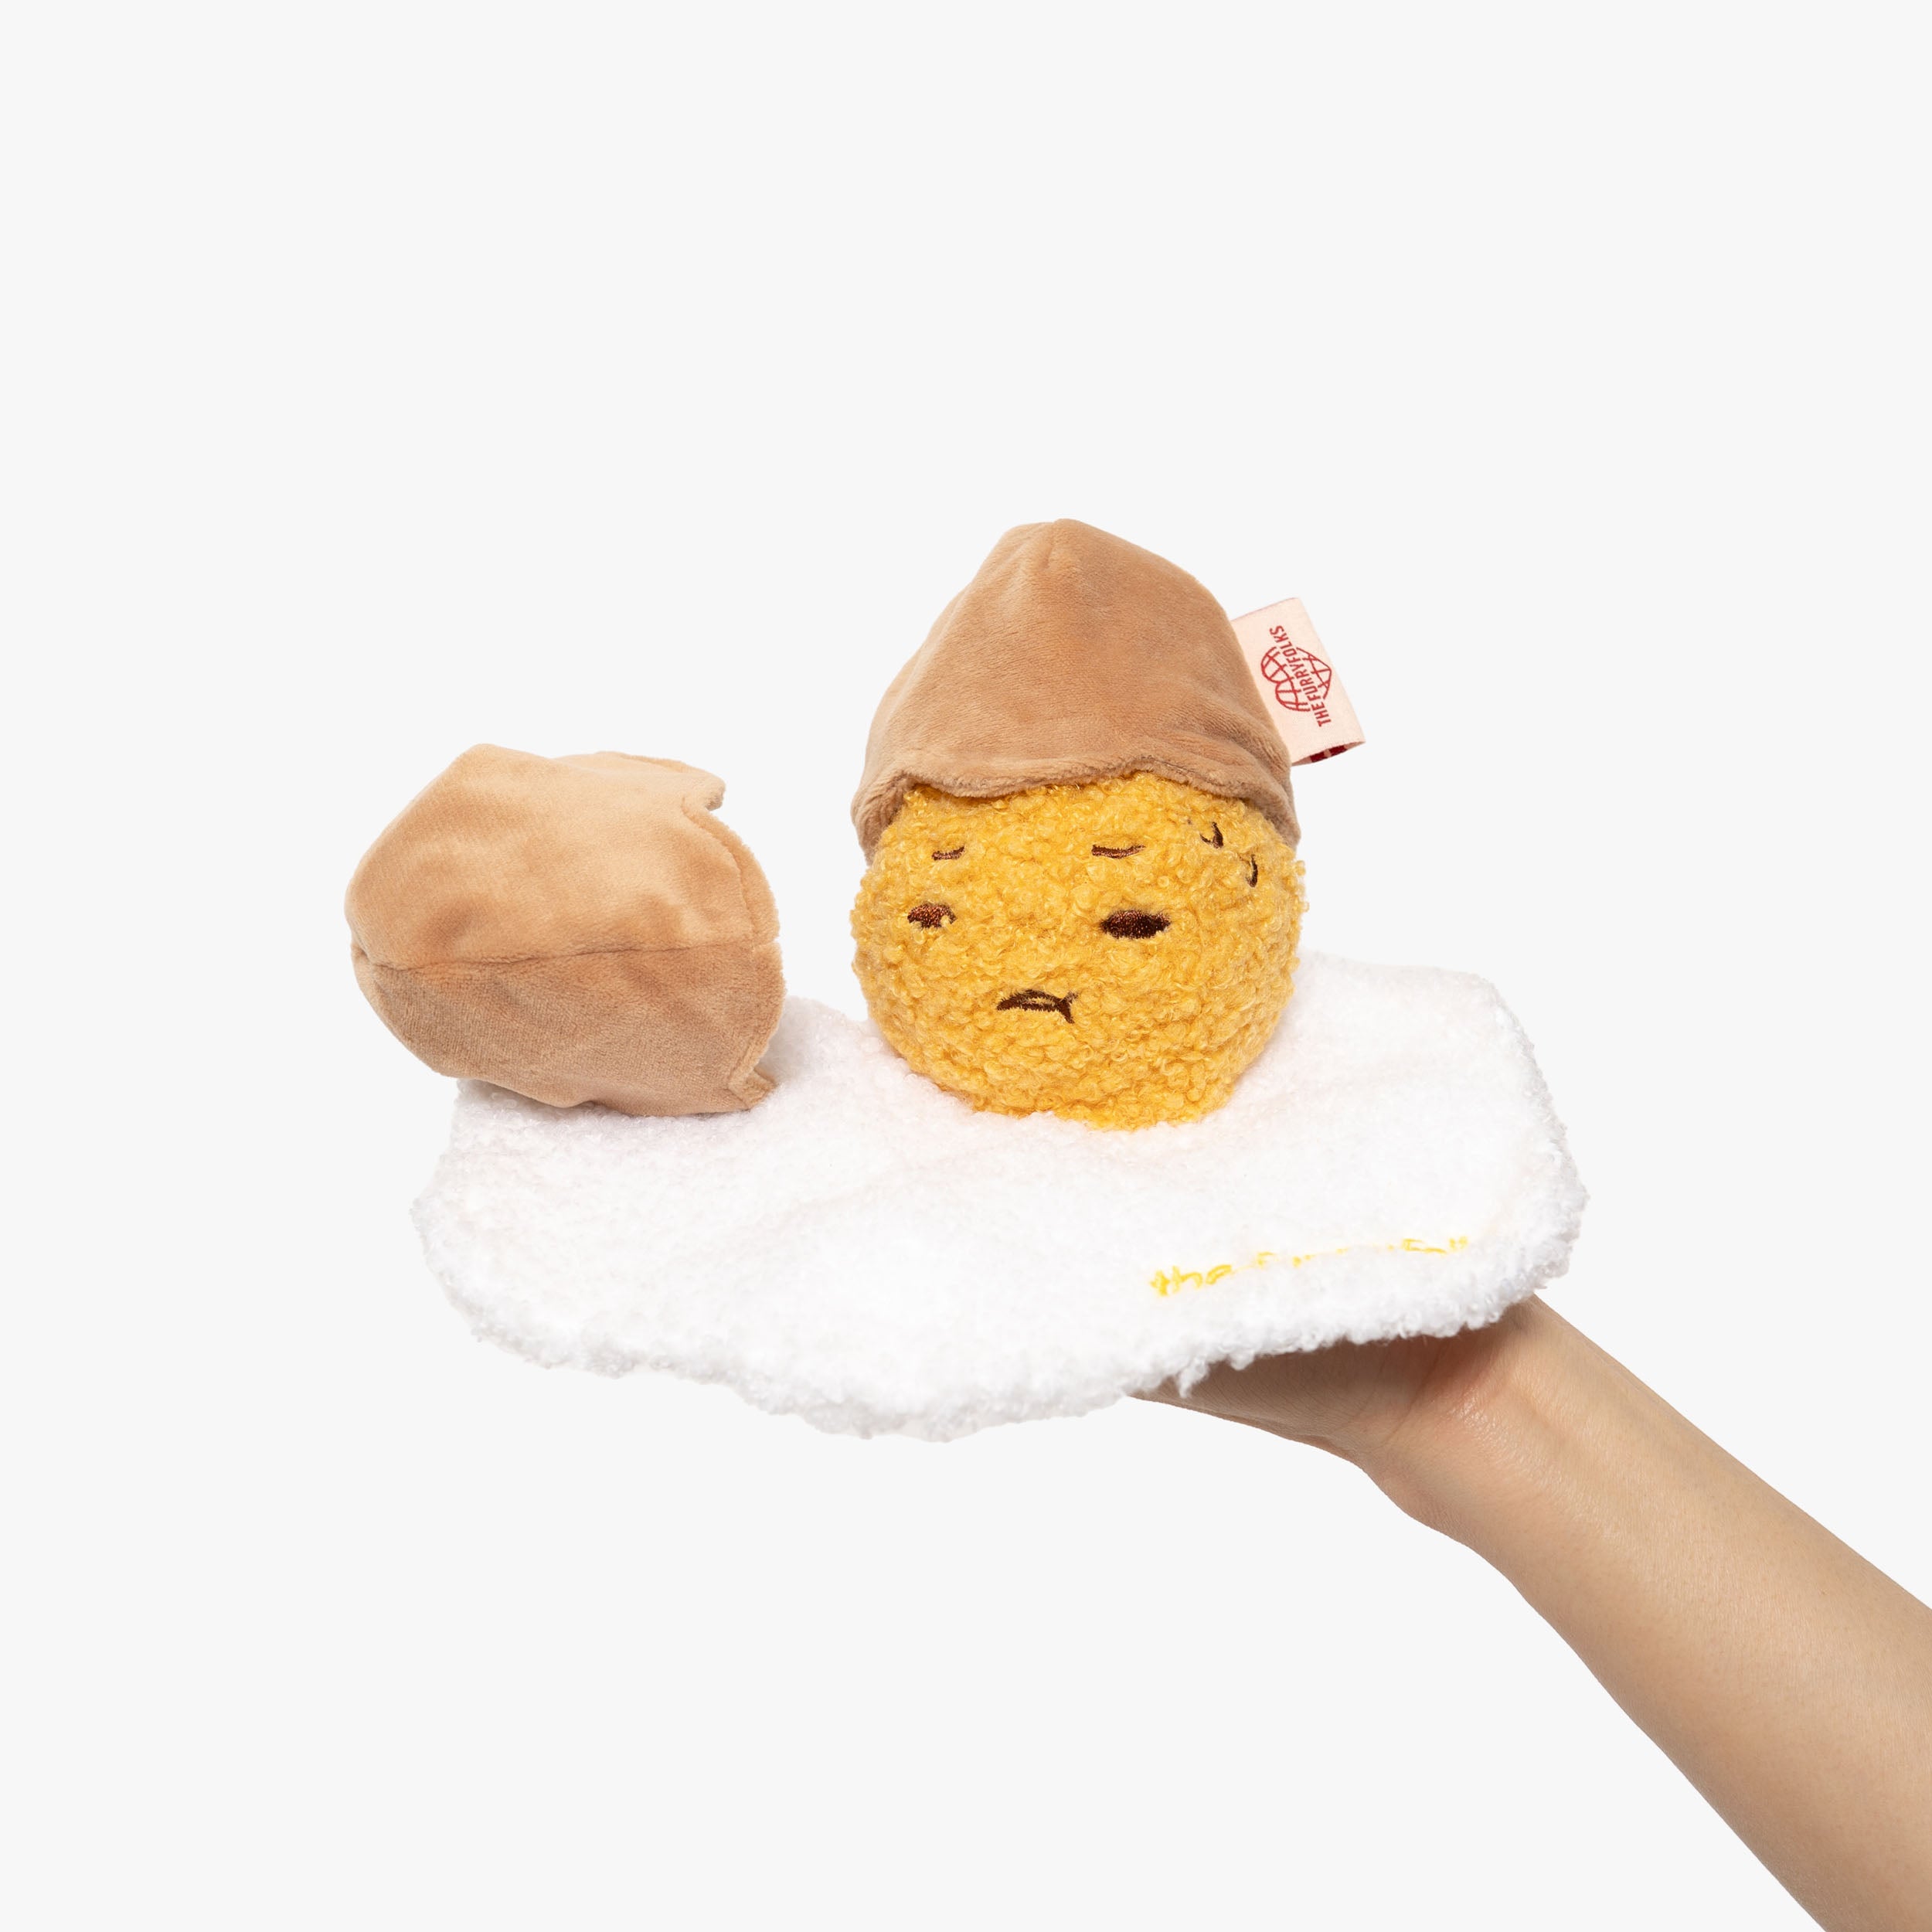 Adorable plush dog toy set, featuring a sunny-side-up egg with a textured yellow center and fluffy white border. Accompanied by a soft brown 'eggshell' hat, the set stimulates pets’ playtime with its interactive design. The toy encourages sniffing and foraging skills, perfect for engaging your furry friend in a healthy and fun activity. Bright, eye-catching, and crafted with care, it's a charming addition to any dog's toy collection. Tagged with 'The Furryfolks' for brand recognition.